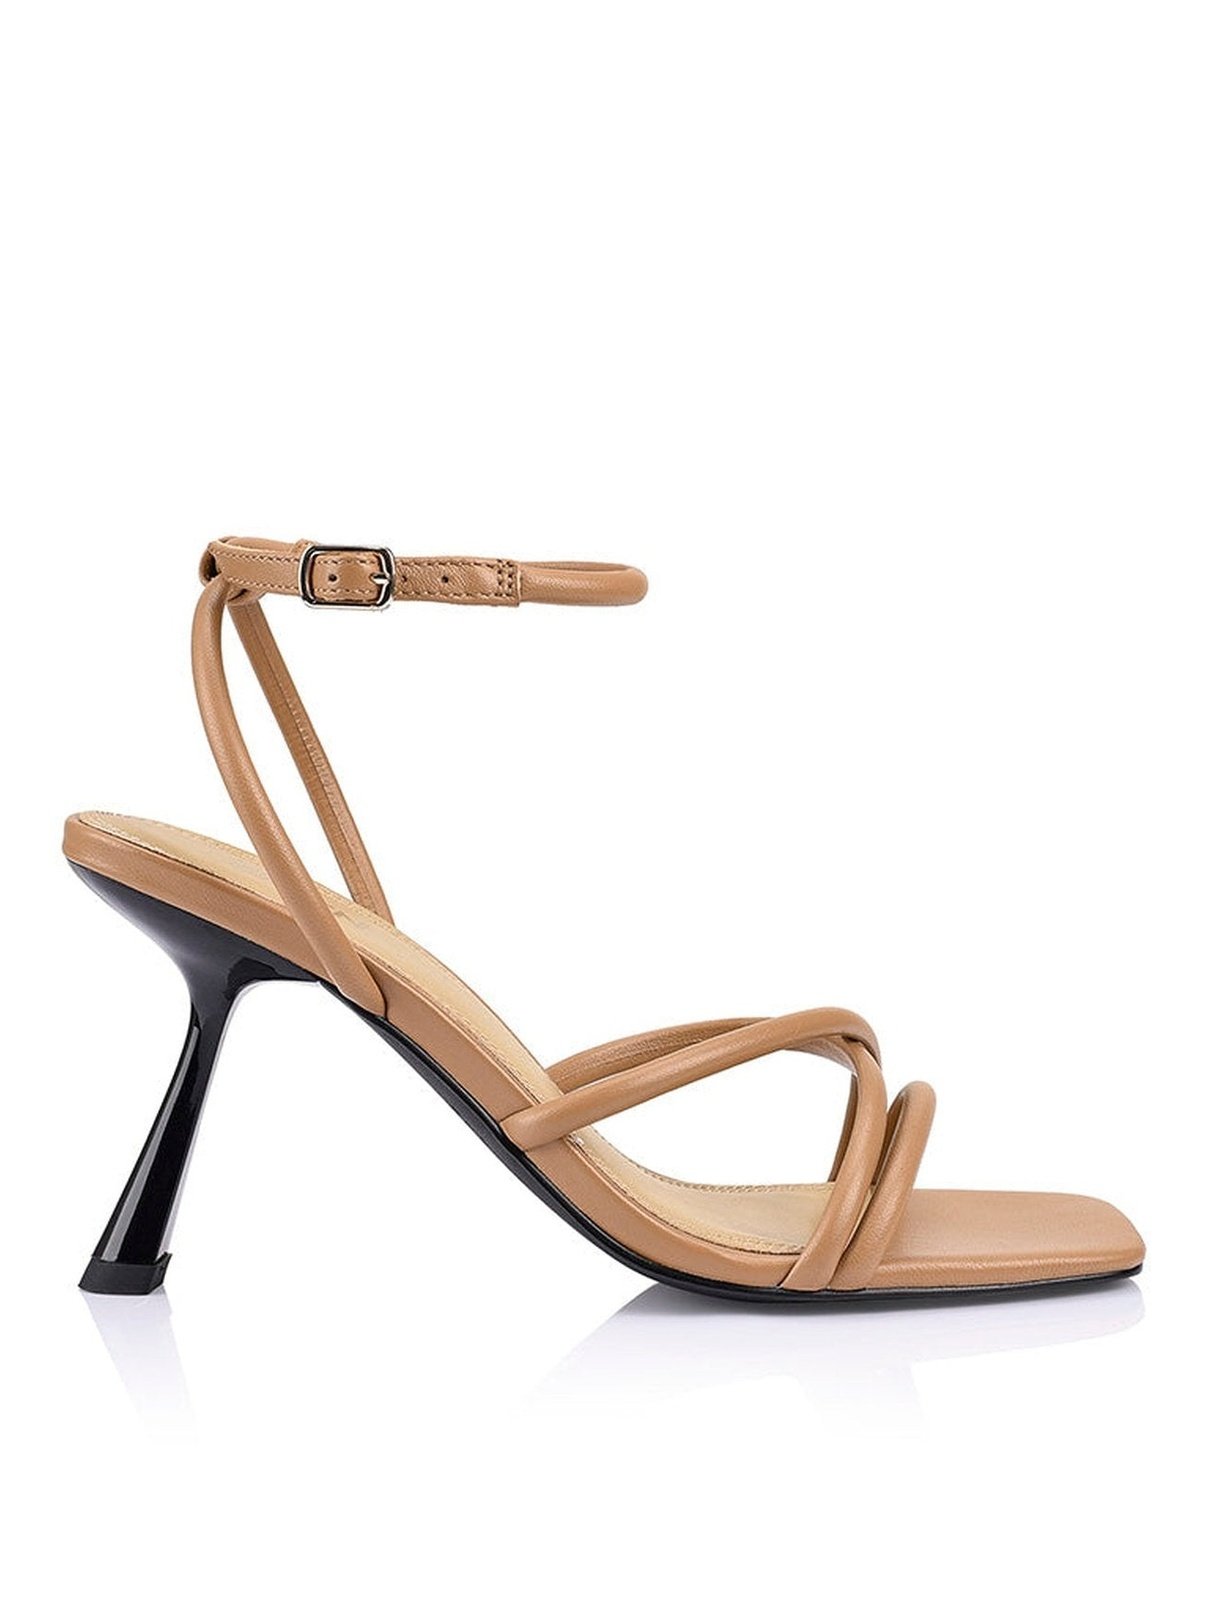 Spruce Heeled Sandals - Soft Tan Leather